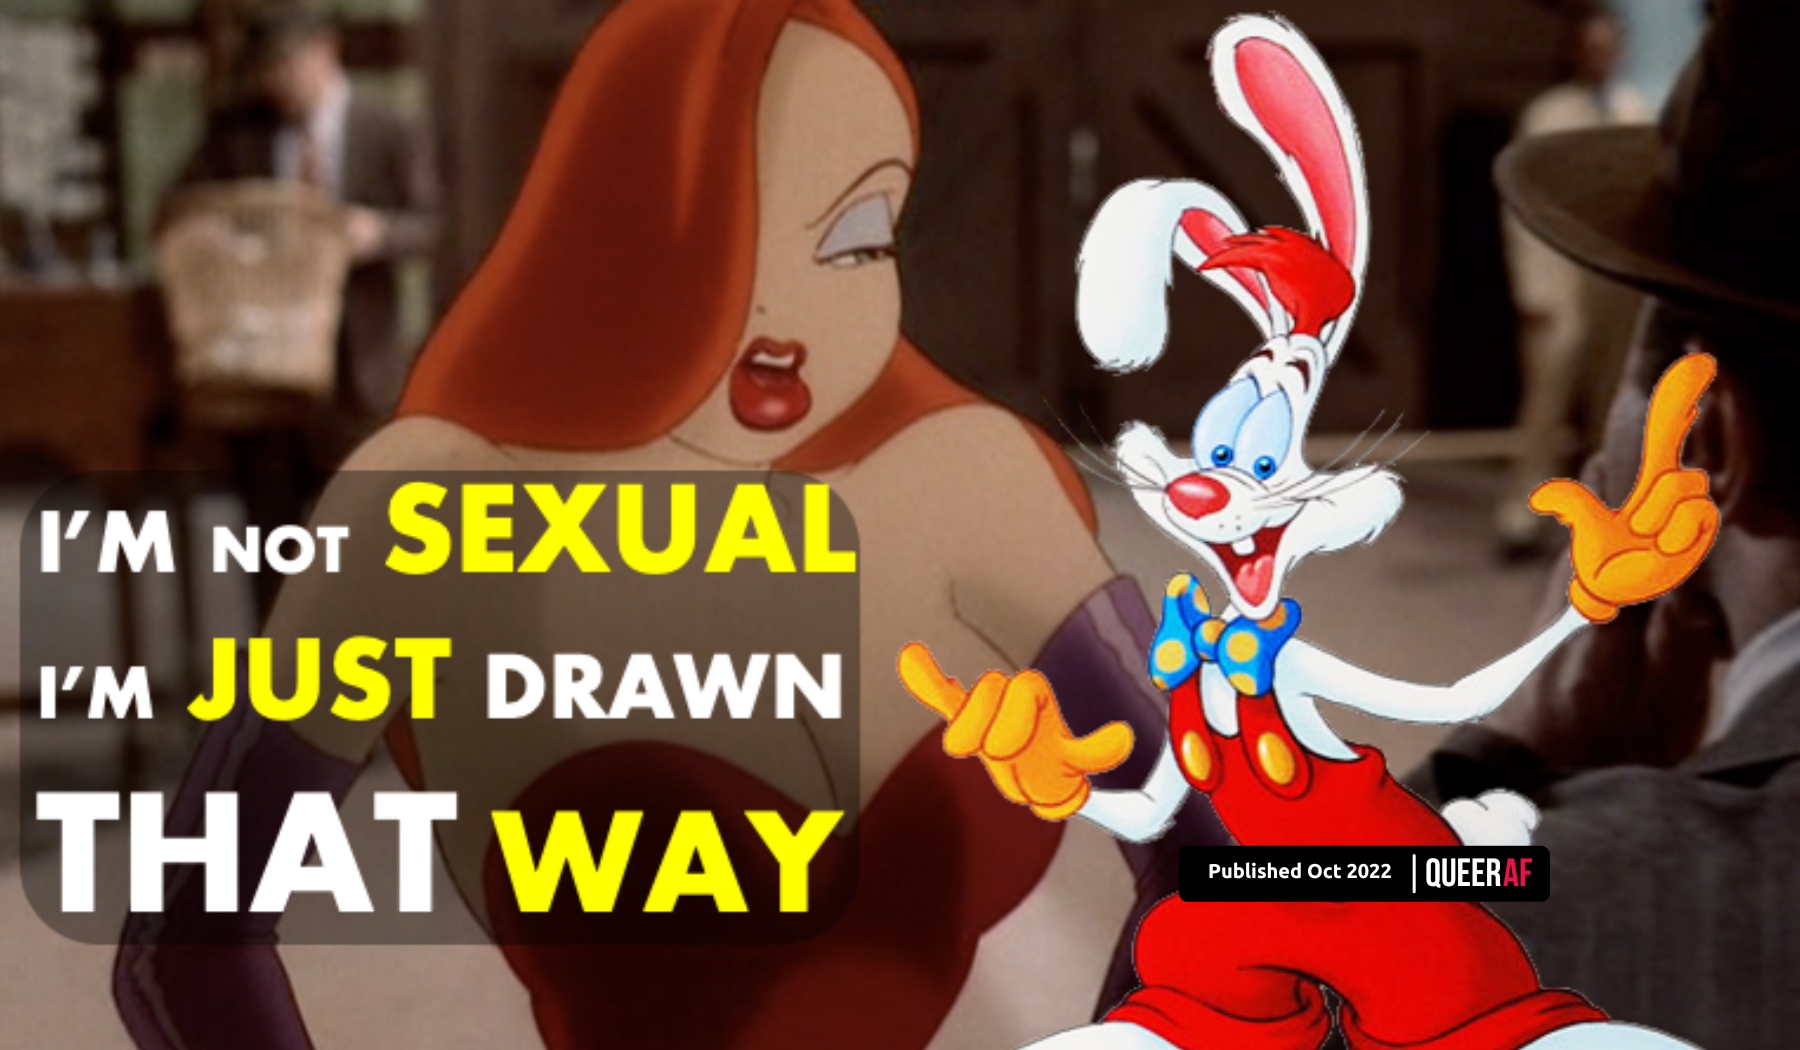 Free Cartoon Porn Jessica Rabbit - Jessica Rabbit is an asexual icon. Here's why that matters